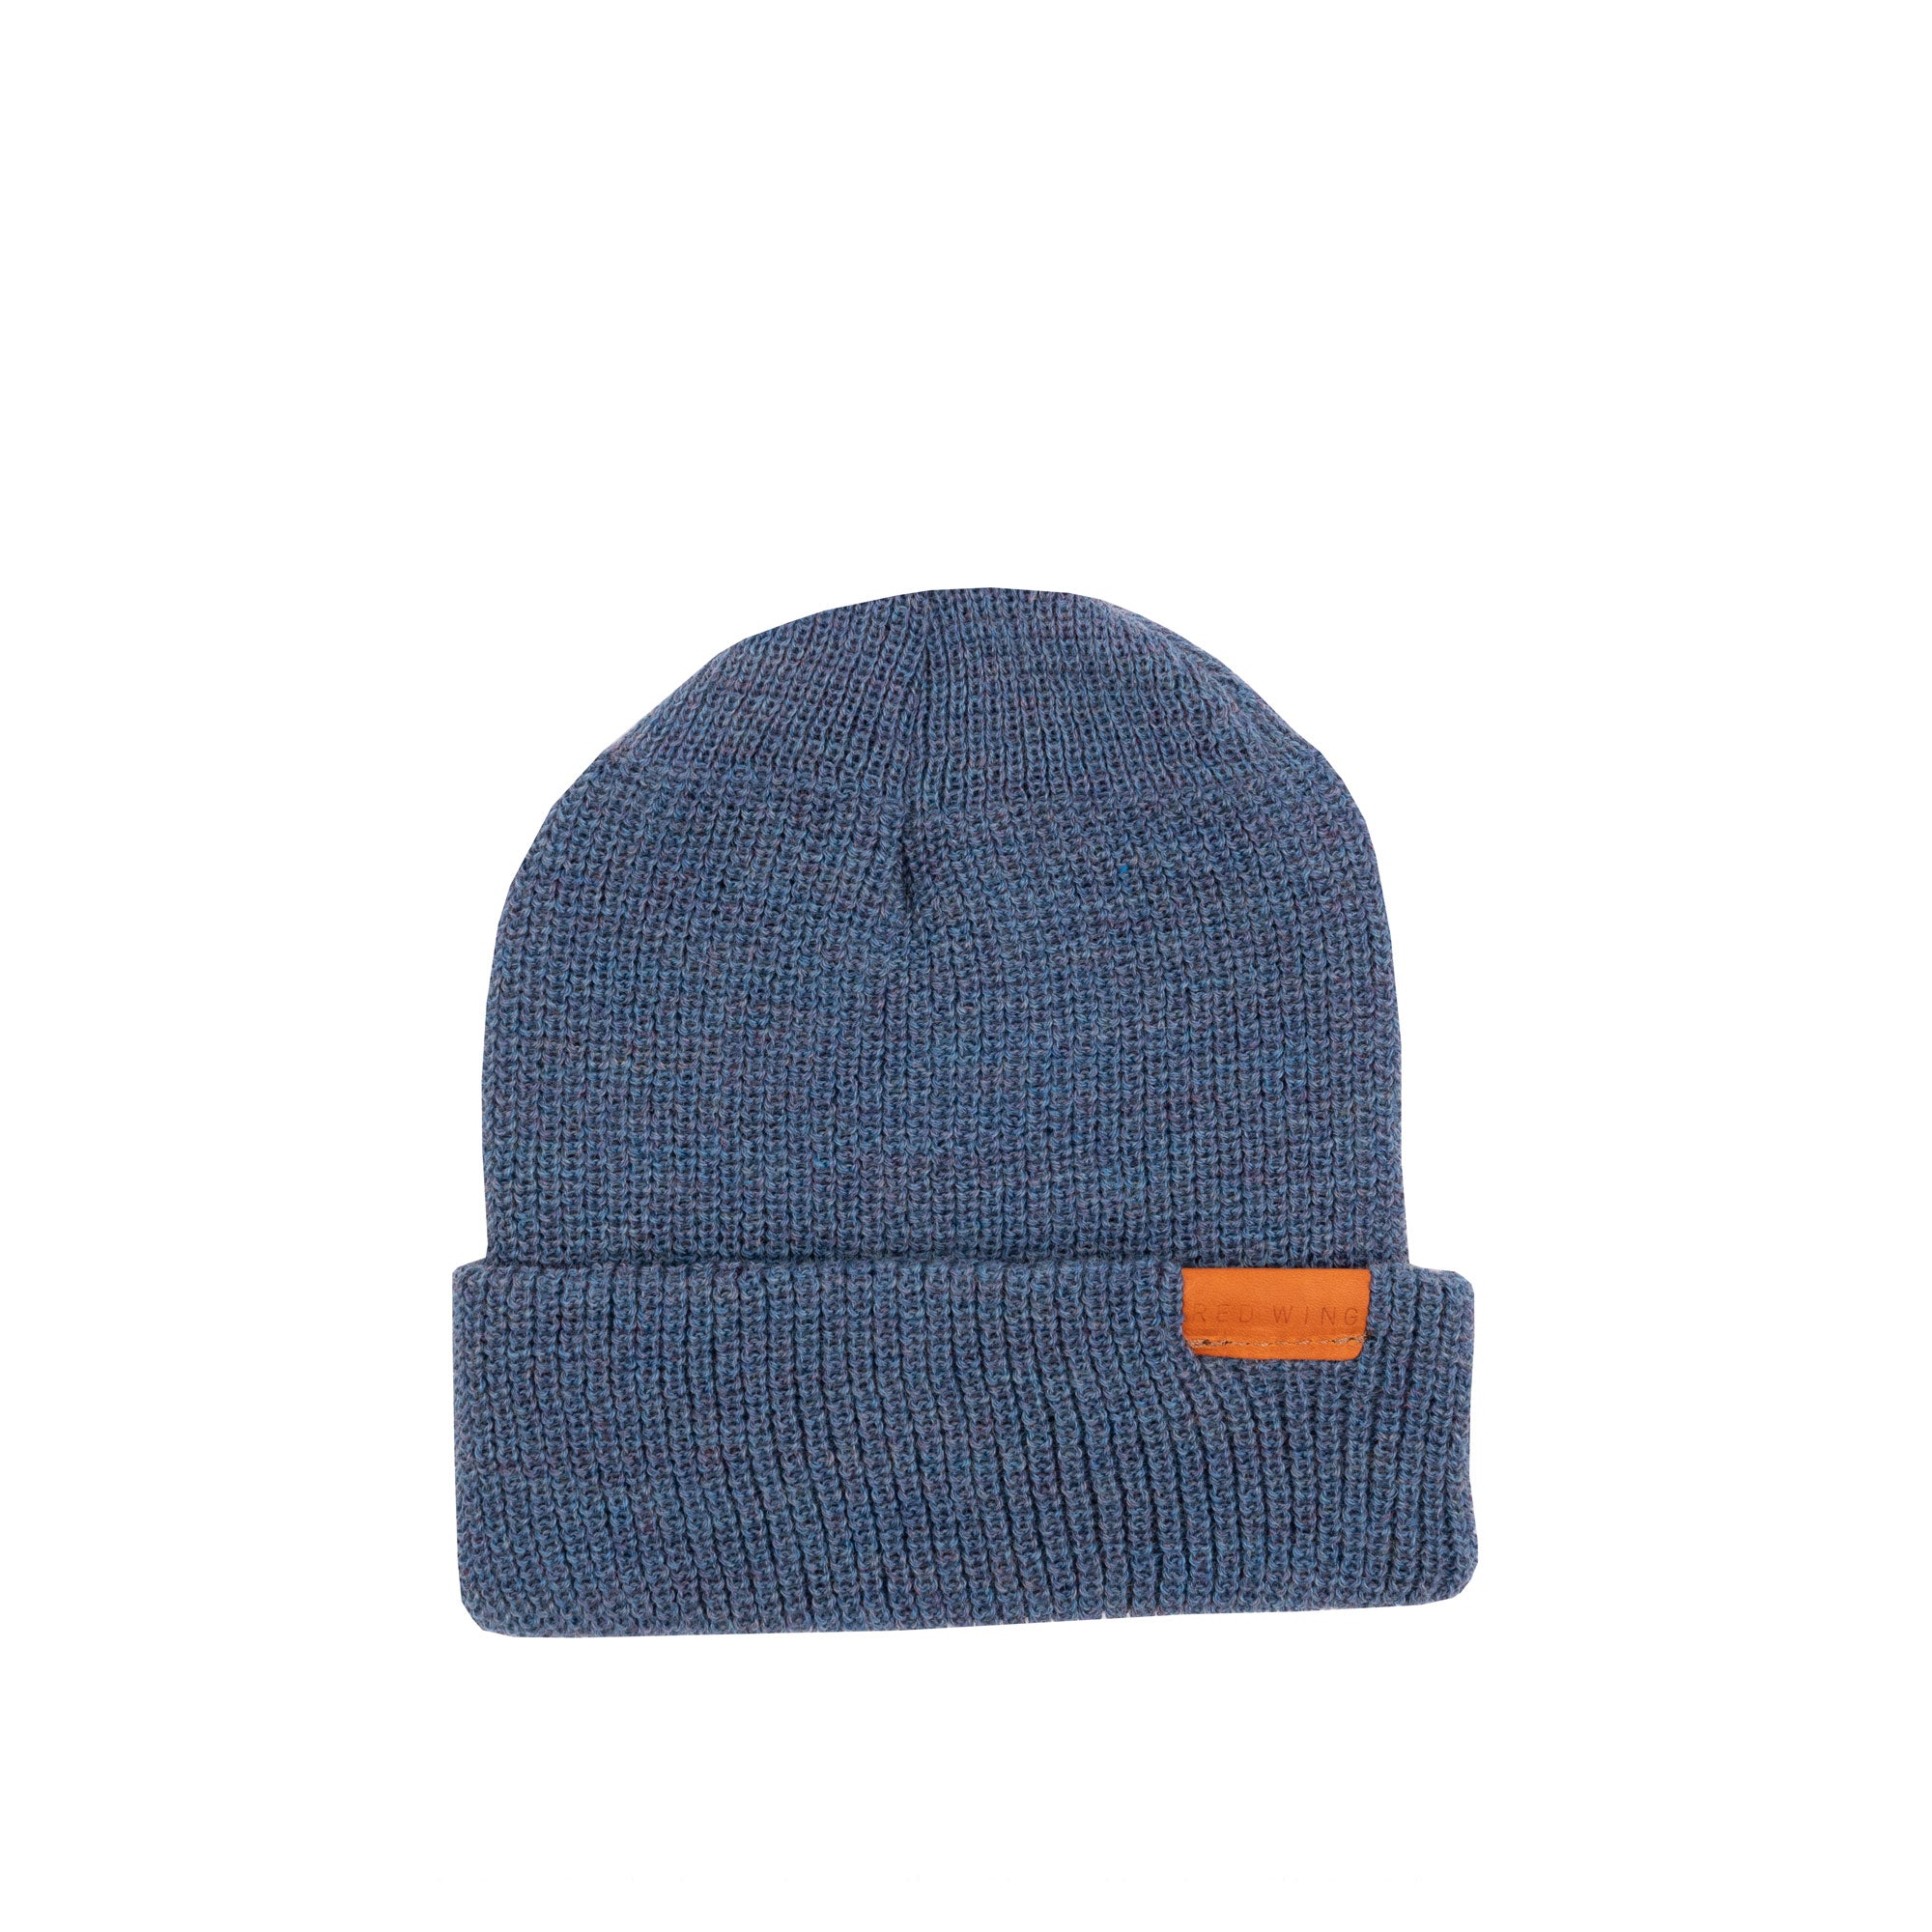 Red Wing Heritage Merino Wool Knit Hat, blue heather